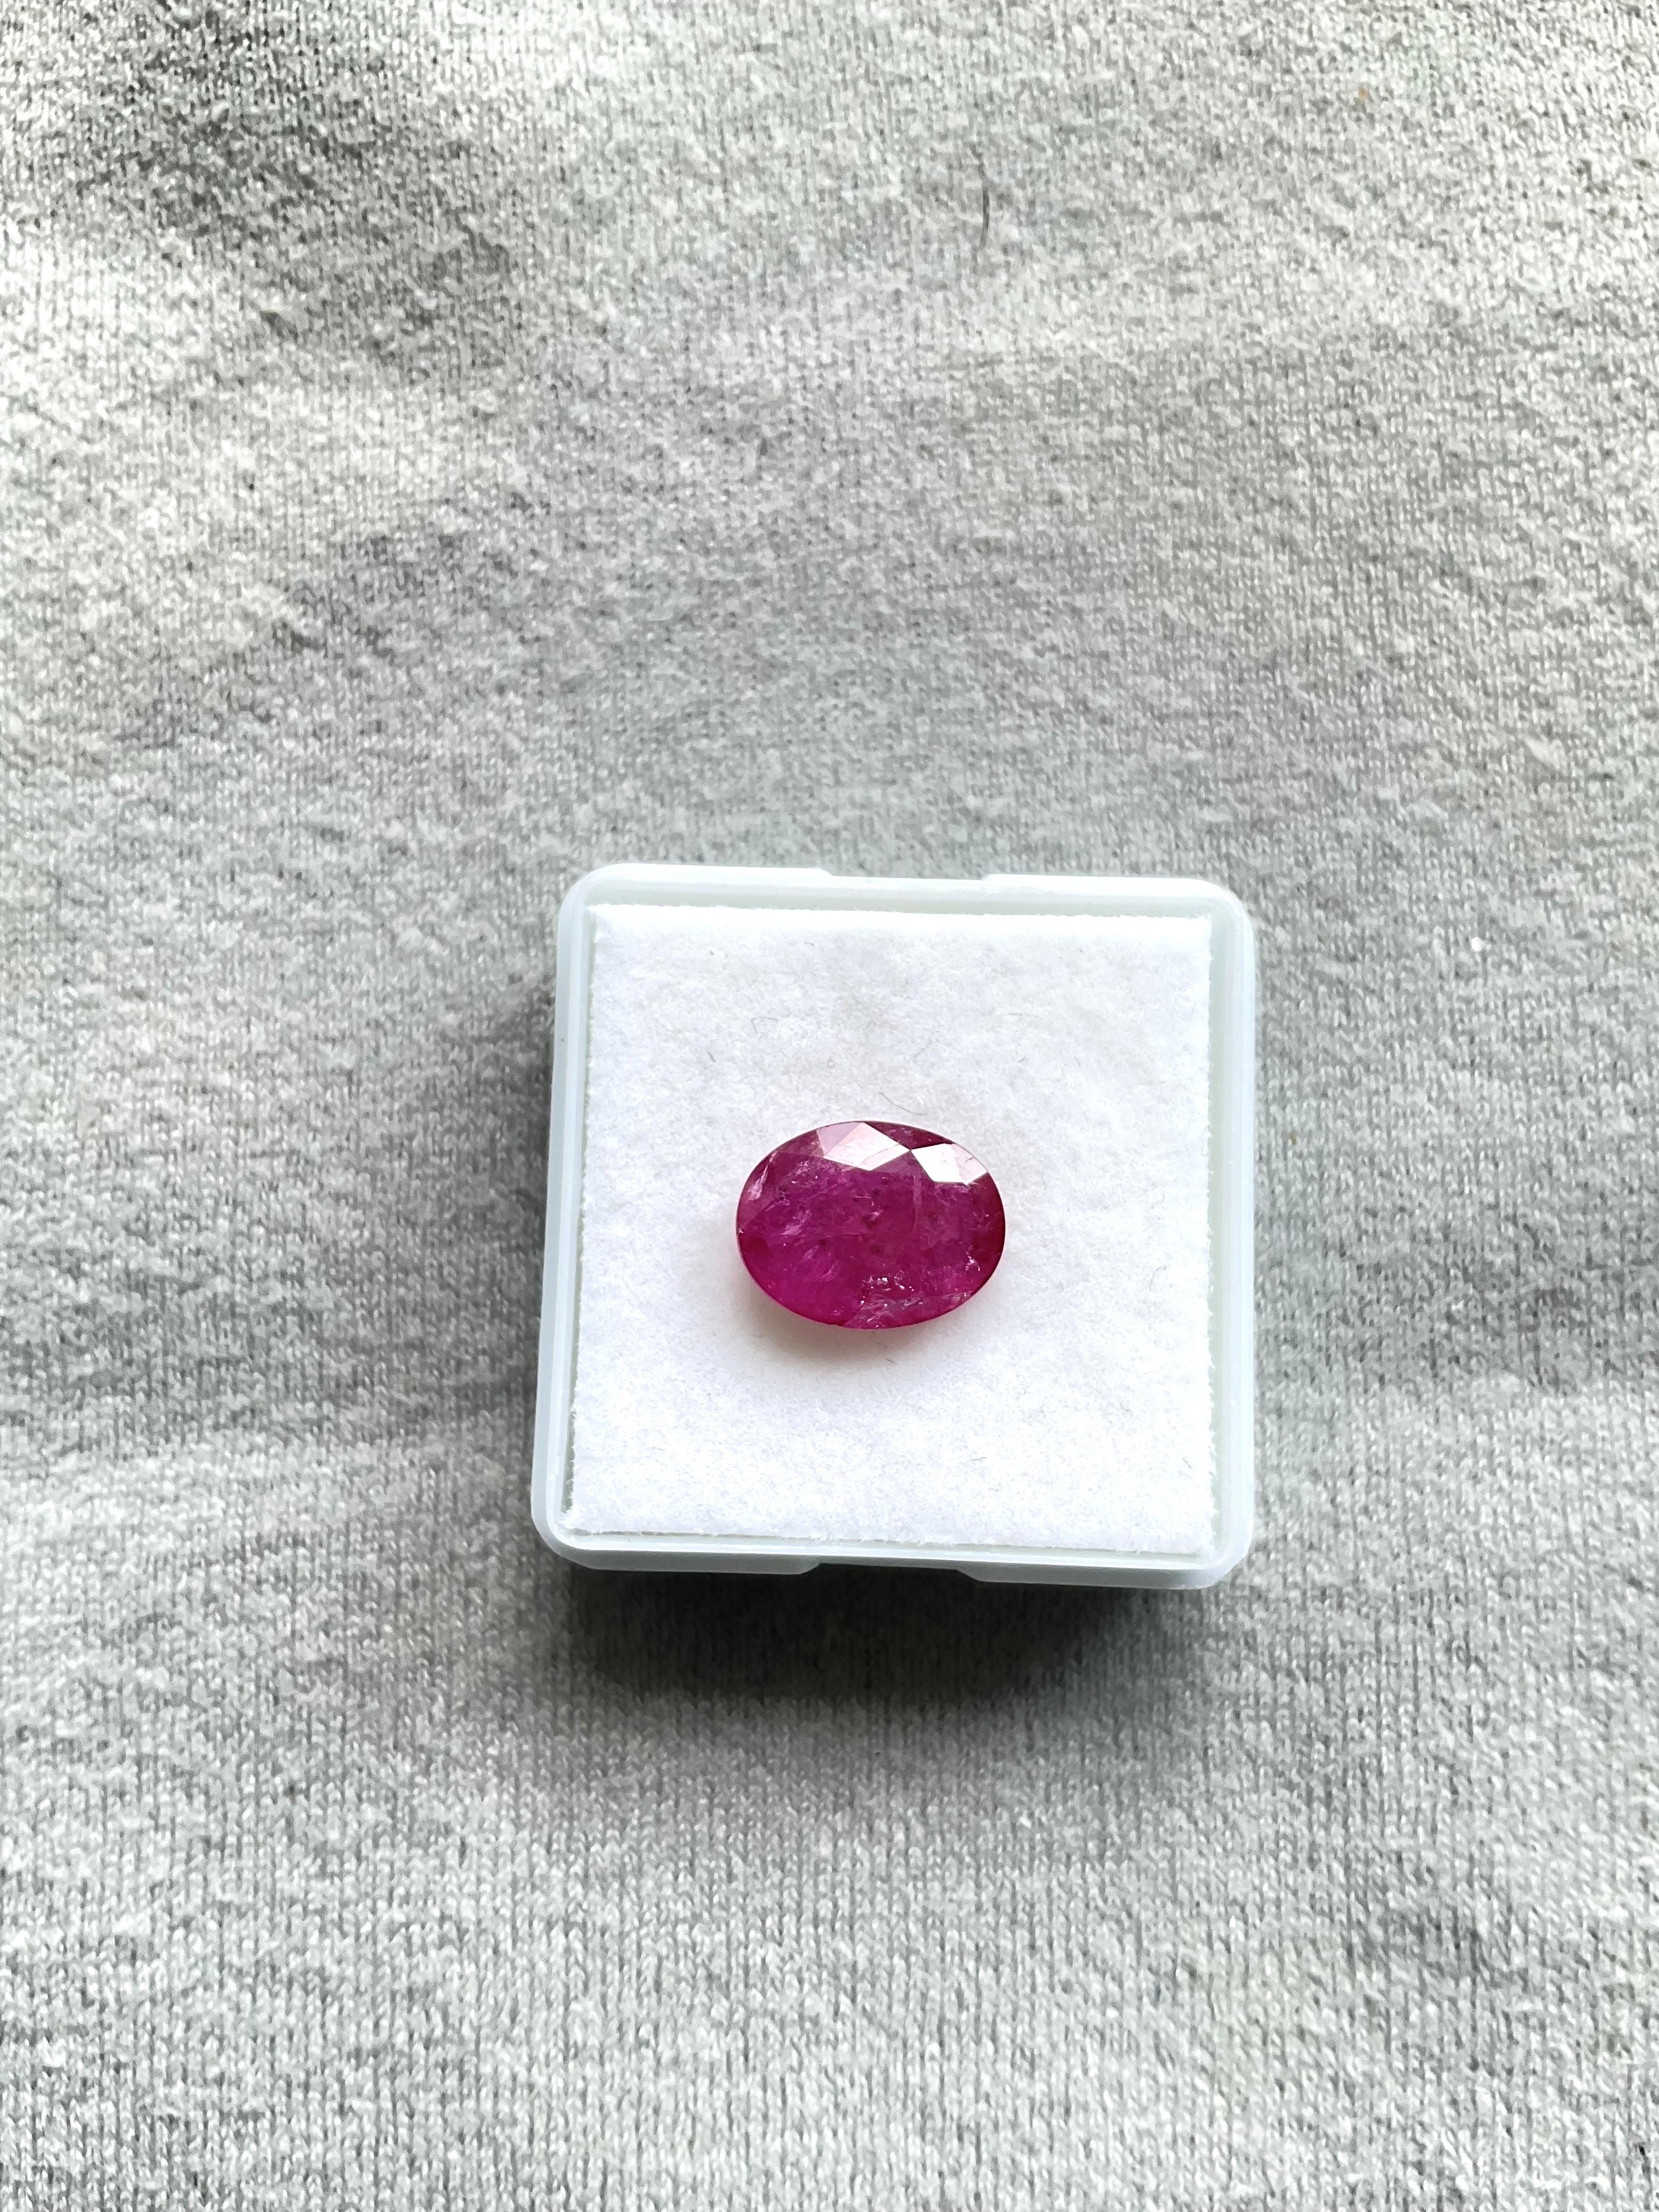 Women's or Men's Certified 3.66 Carats Mozambique Ruby Oval Faceted Cutstone No Heat Natural Gem For Sale